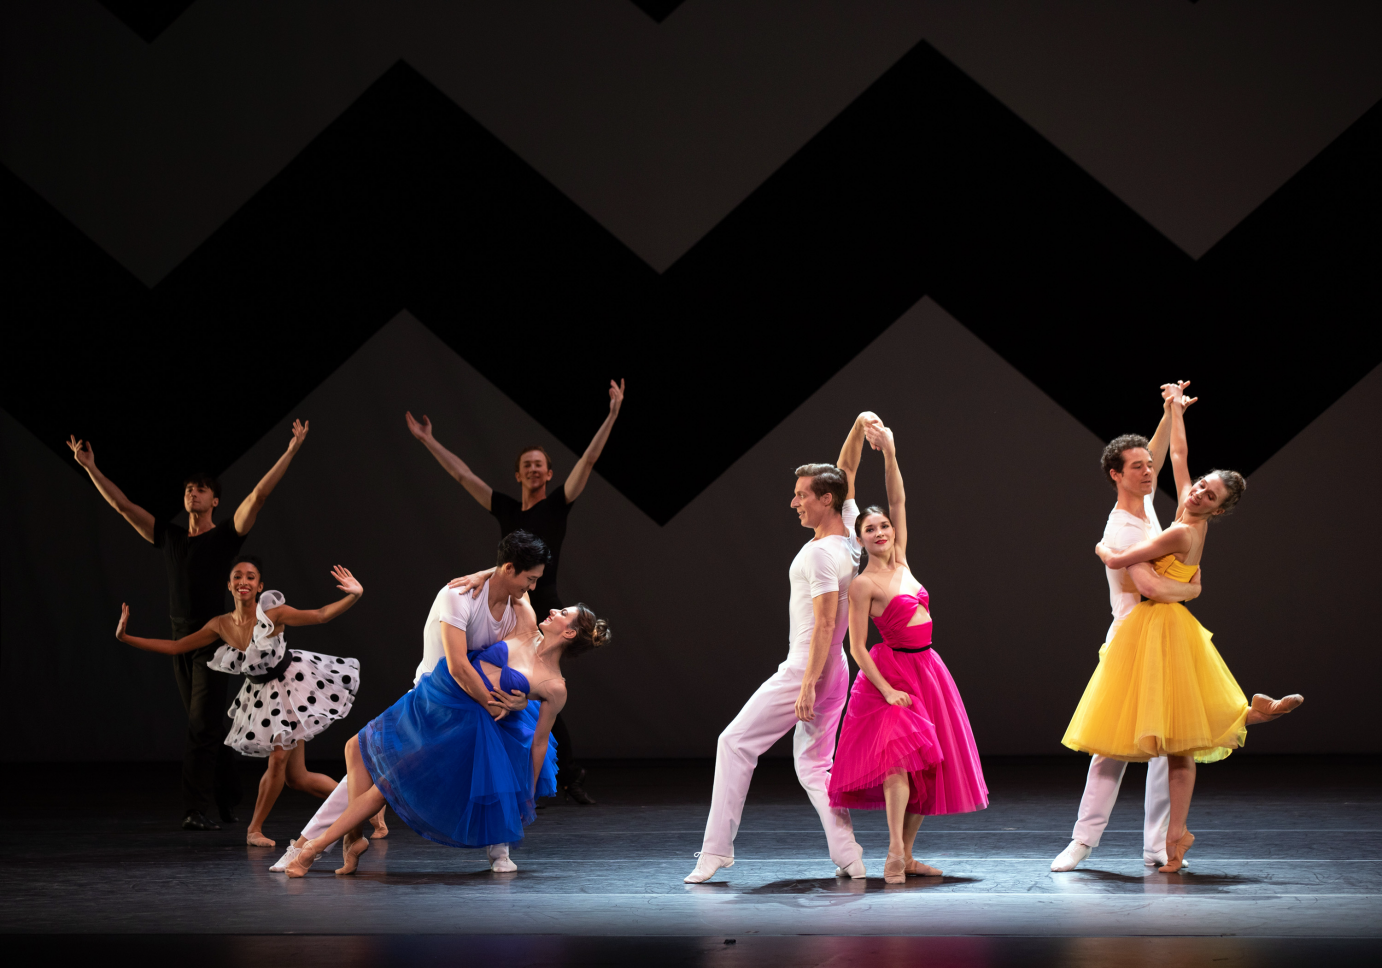 Three couples pose in a line with classic dips and closed position dance holds. On the left side, two men extend their arms in a V while a woman in a polka-dot dress places her arms to the side, wrists flexed.